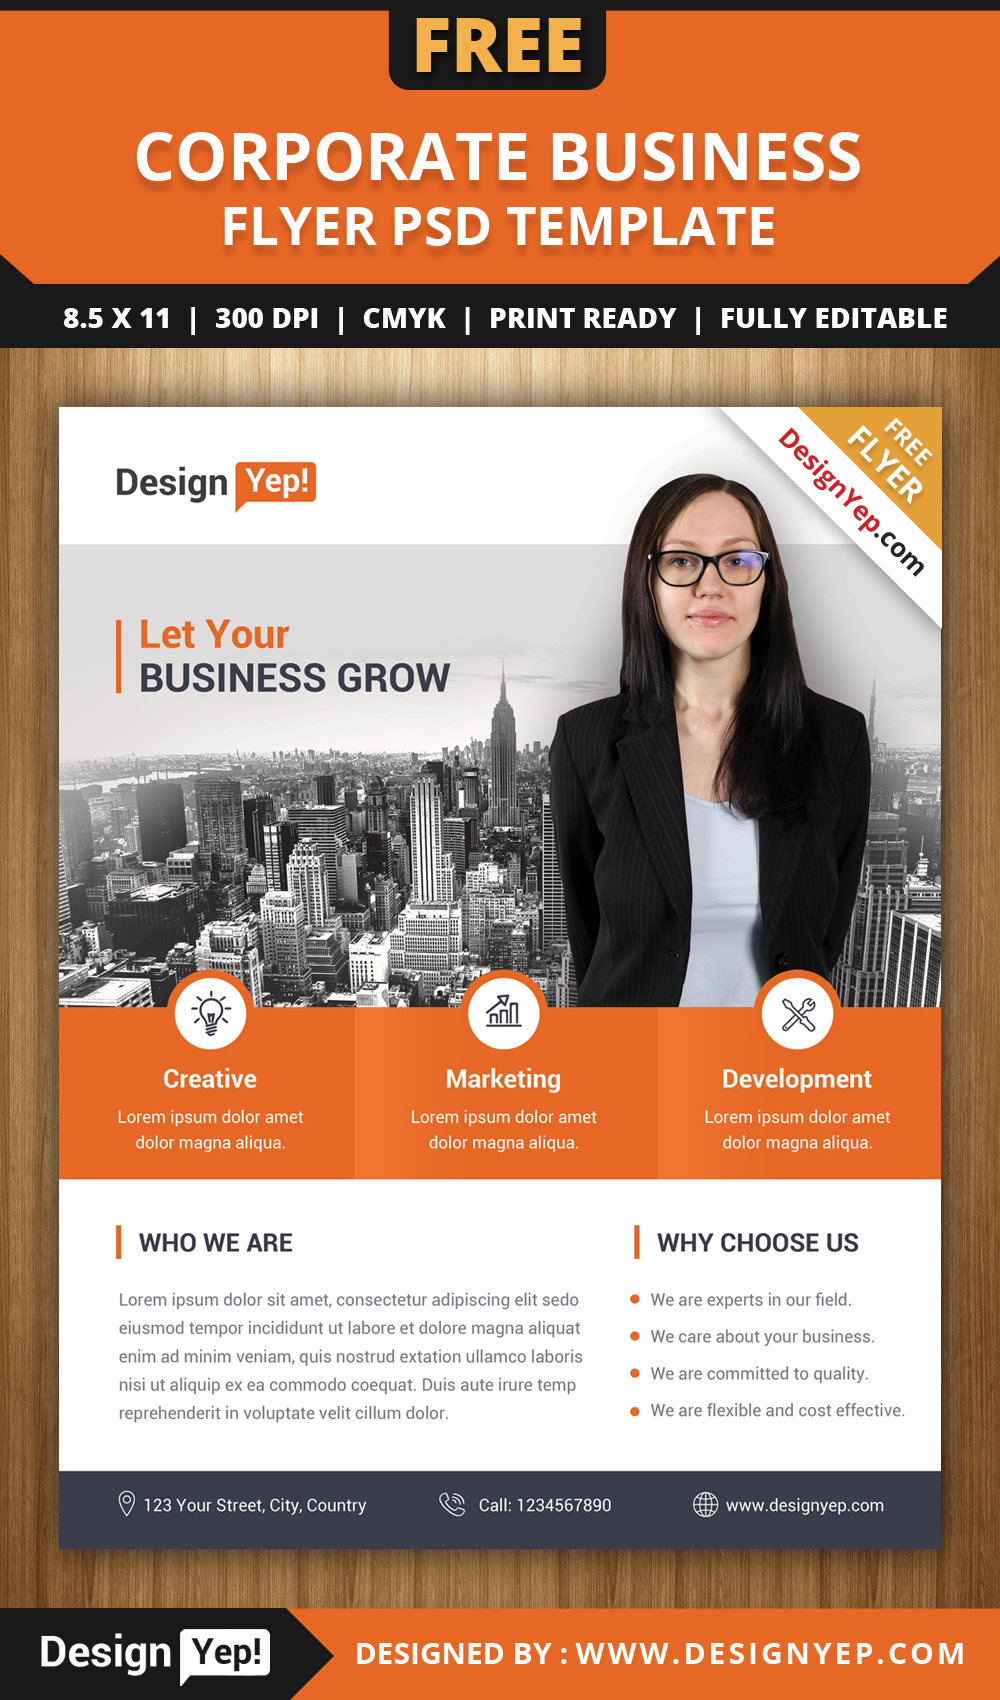 Free Corporate Business Flyer Psd Template – Designyep Throughout Free Business Flyer Templates For Microsoft Word